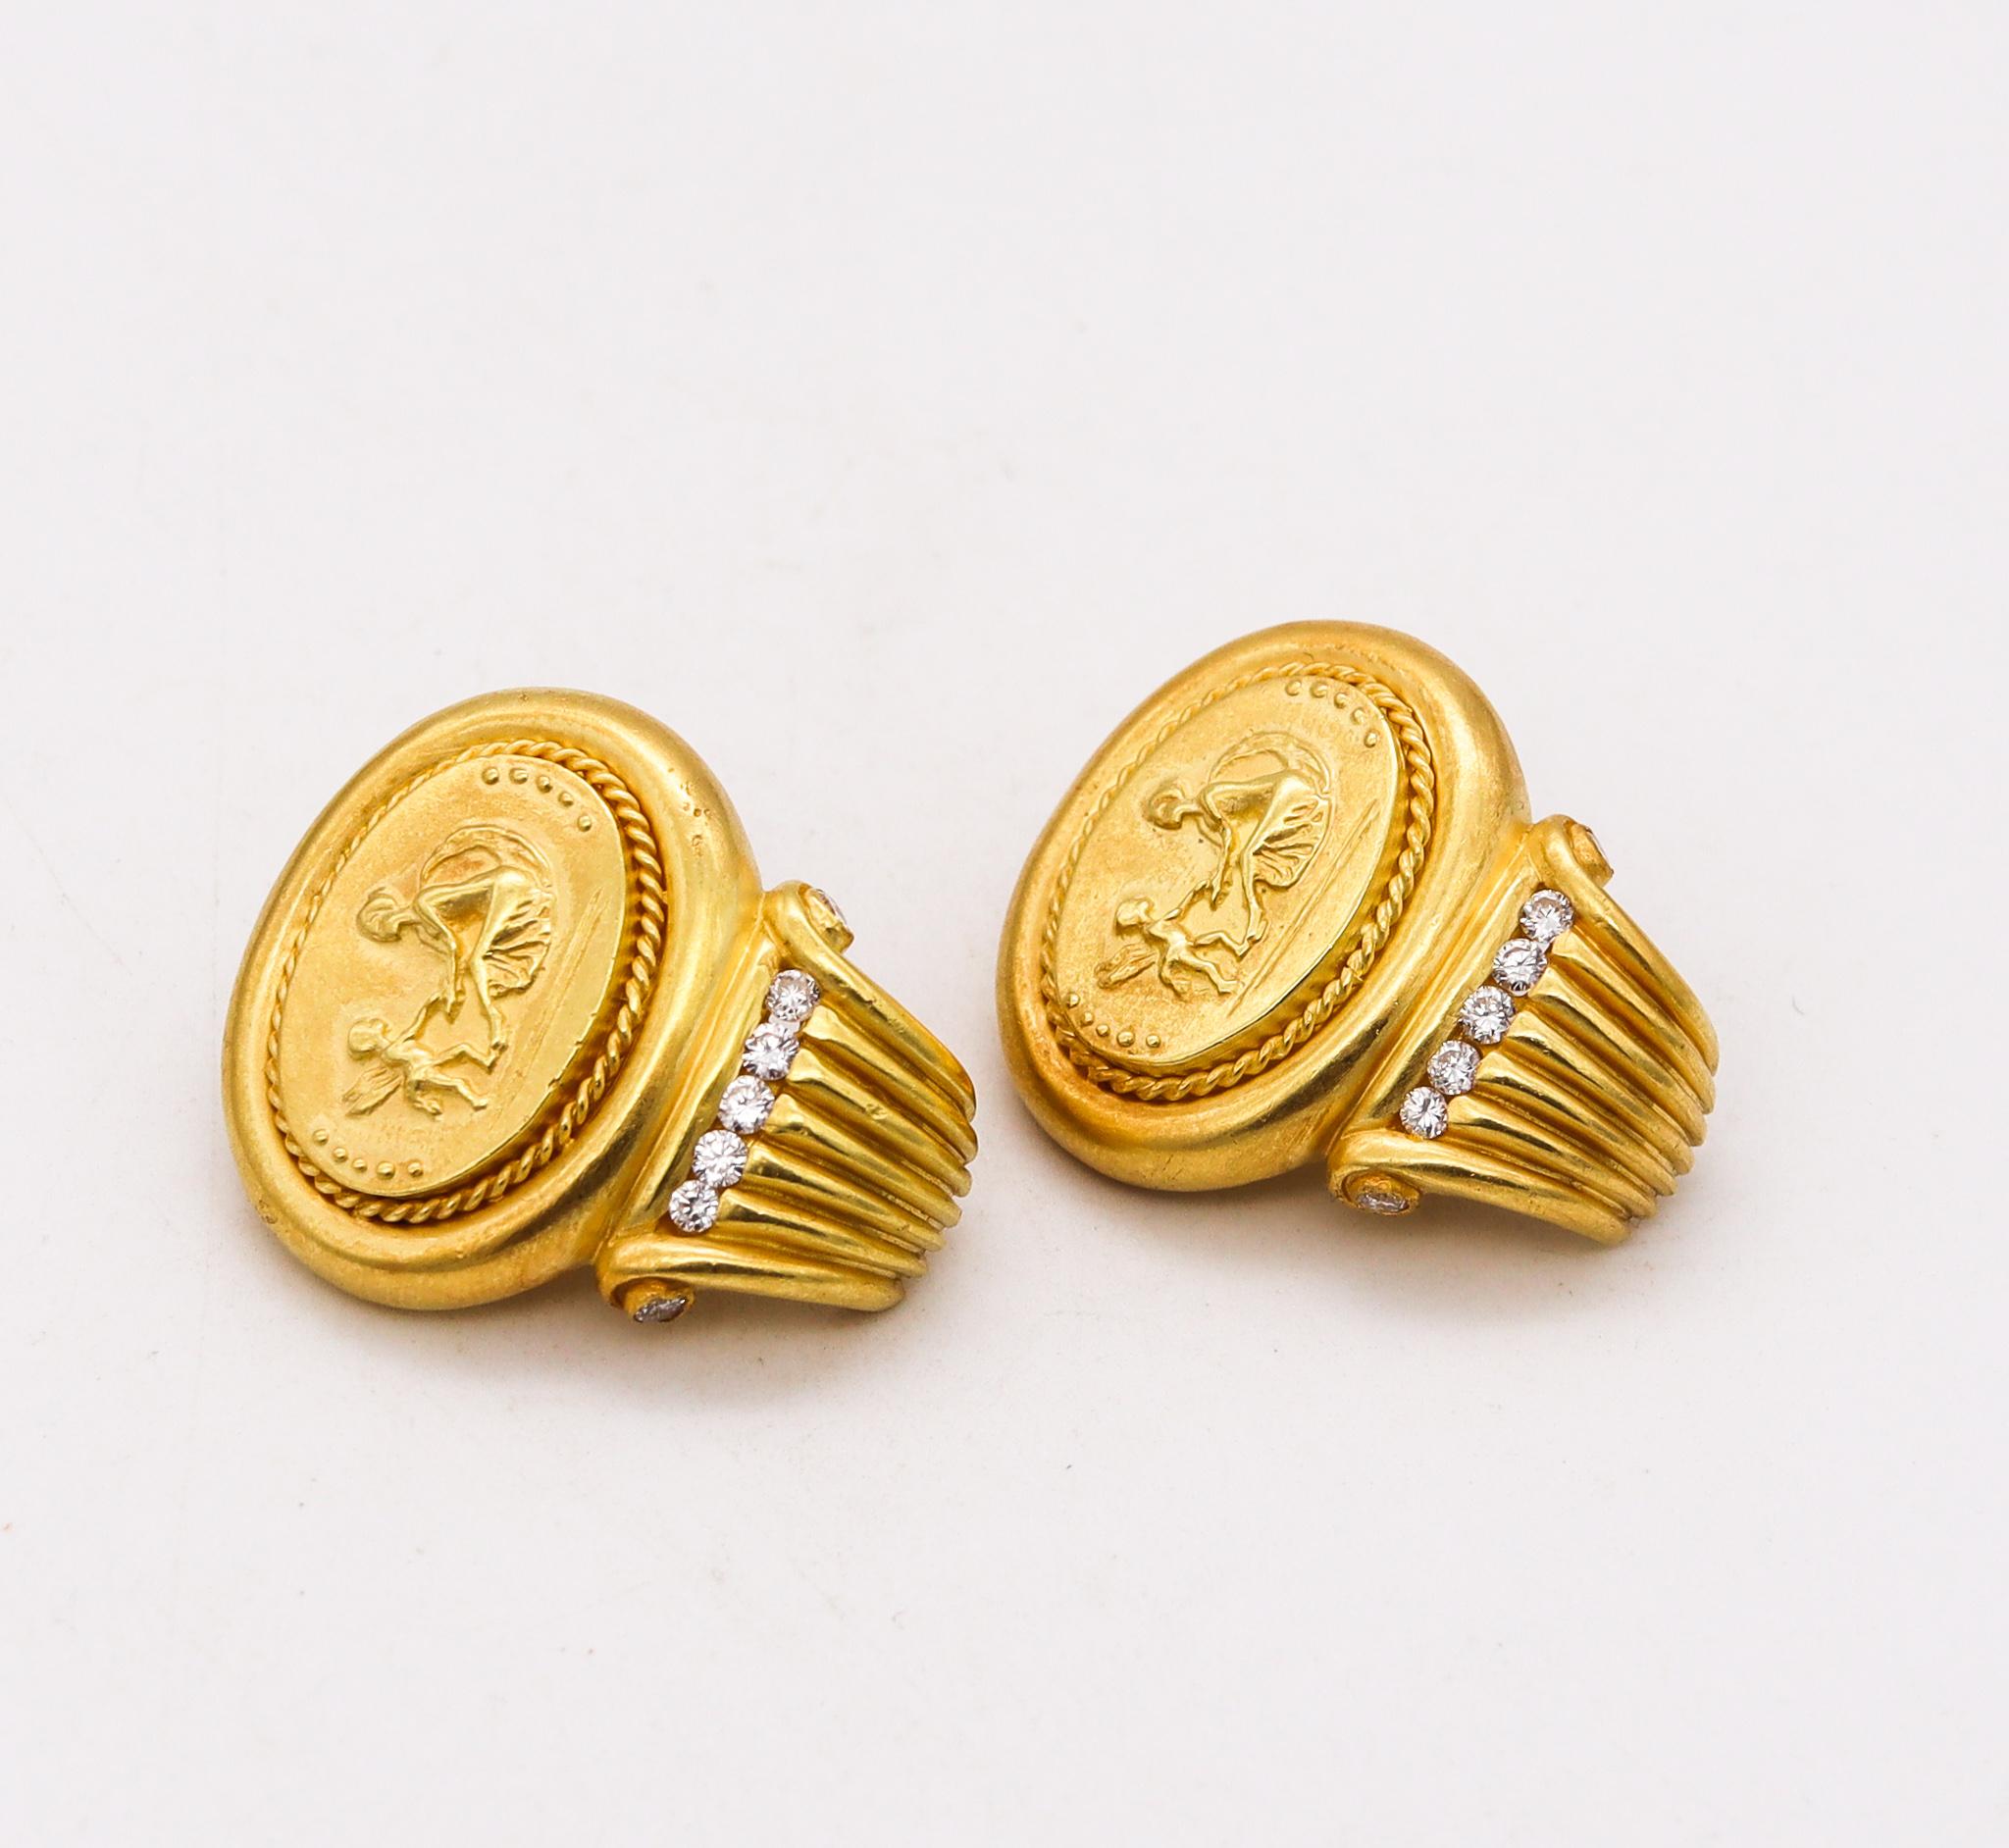 Greek revival motif earrings designed by SeidenGang.

Beautiful vintage pieces, made by the jewelry designer's SeidenGang. These early pair of clip-earrings was part of the iconic Etruscan-Roman revivals collection, carefully crafted in solid rich